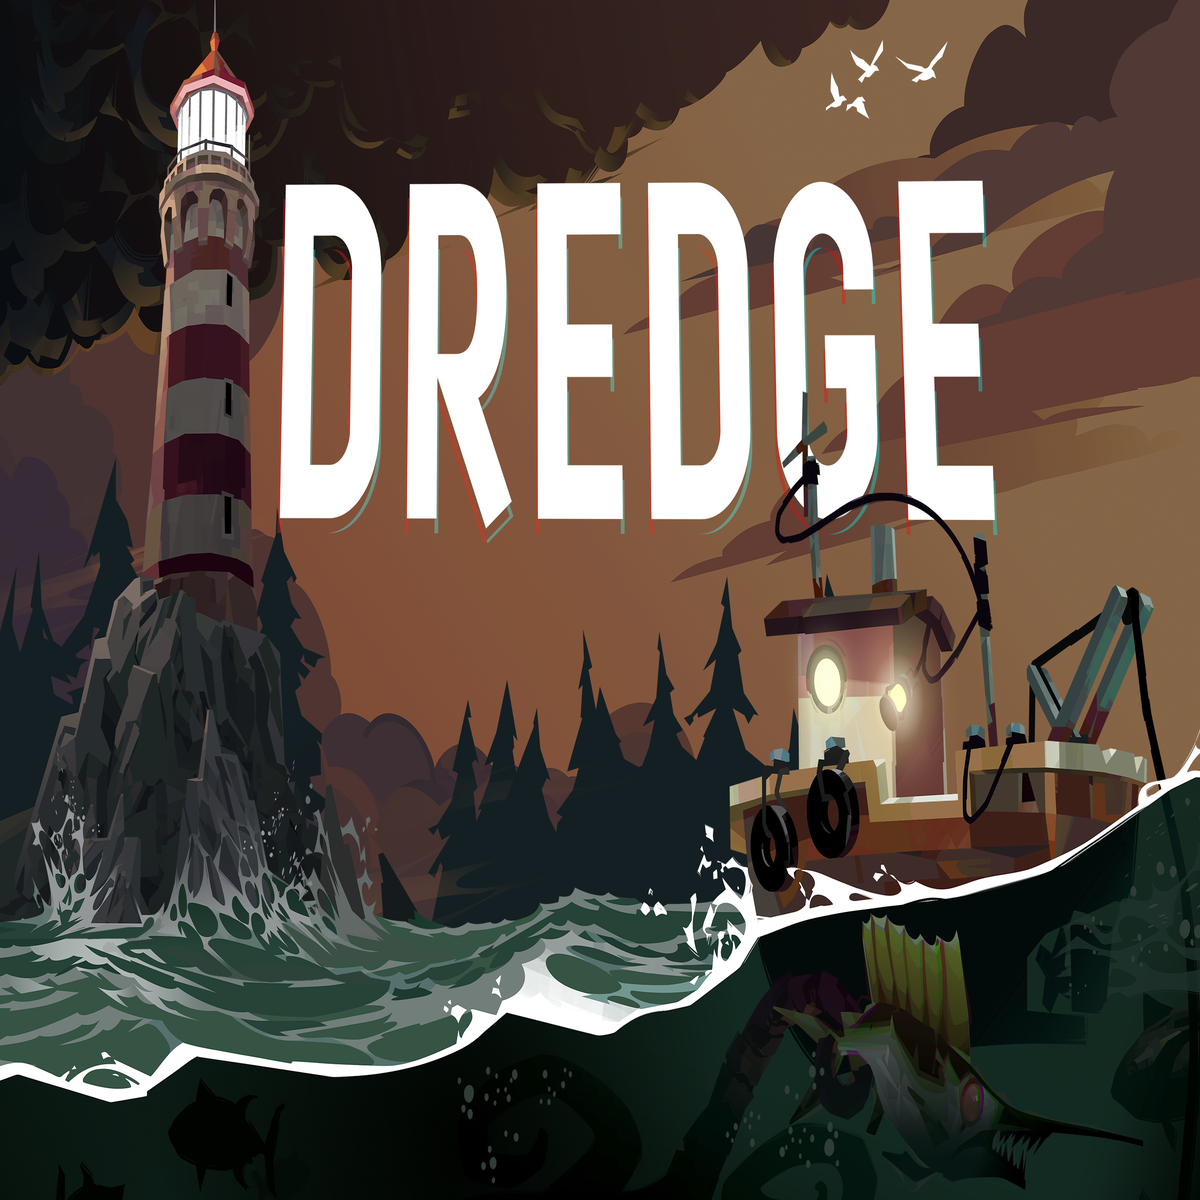 DREDGE on X: Those of you thinking of grabbing DREDGE on the  #NintendoSwitch will be please to know, the free demo is available right  now! Take DREDGE for a spin before our